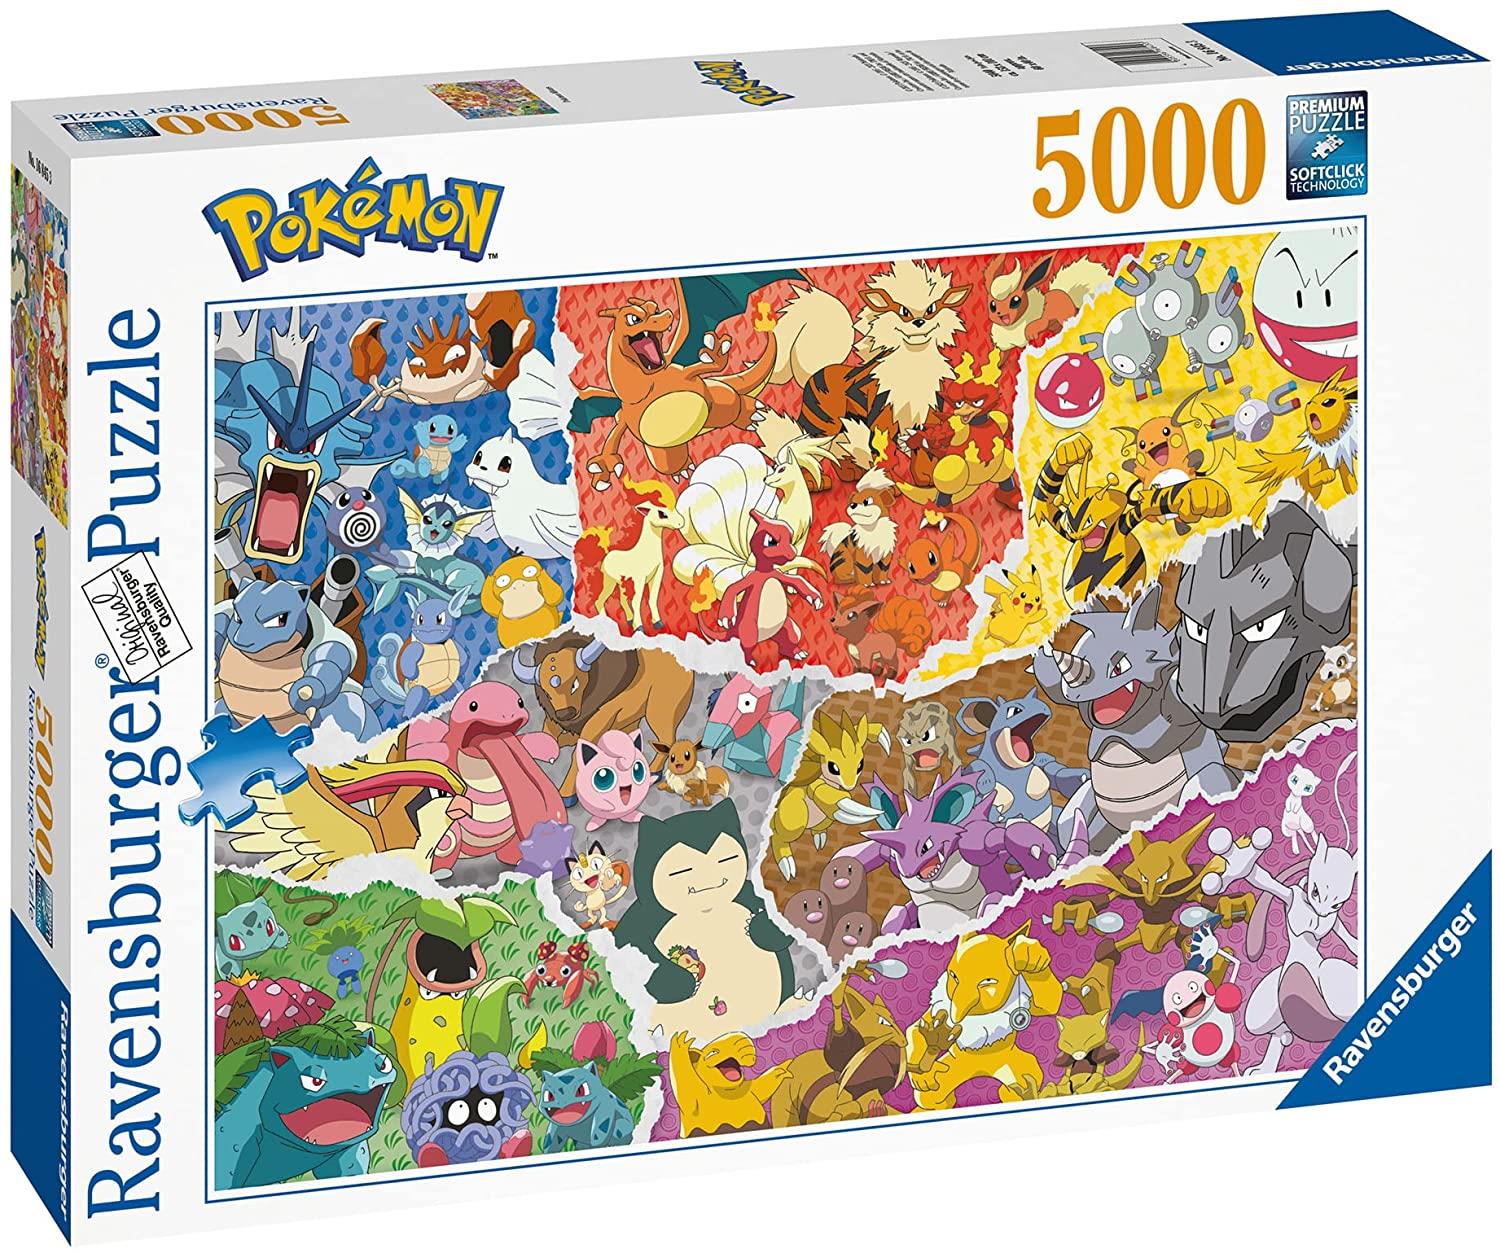 Puzzle Jumbo 5000 pièces Music Store 